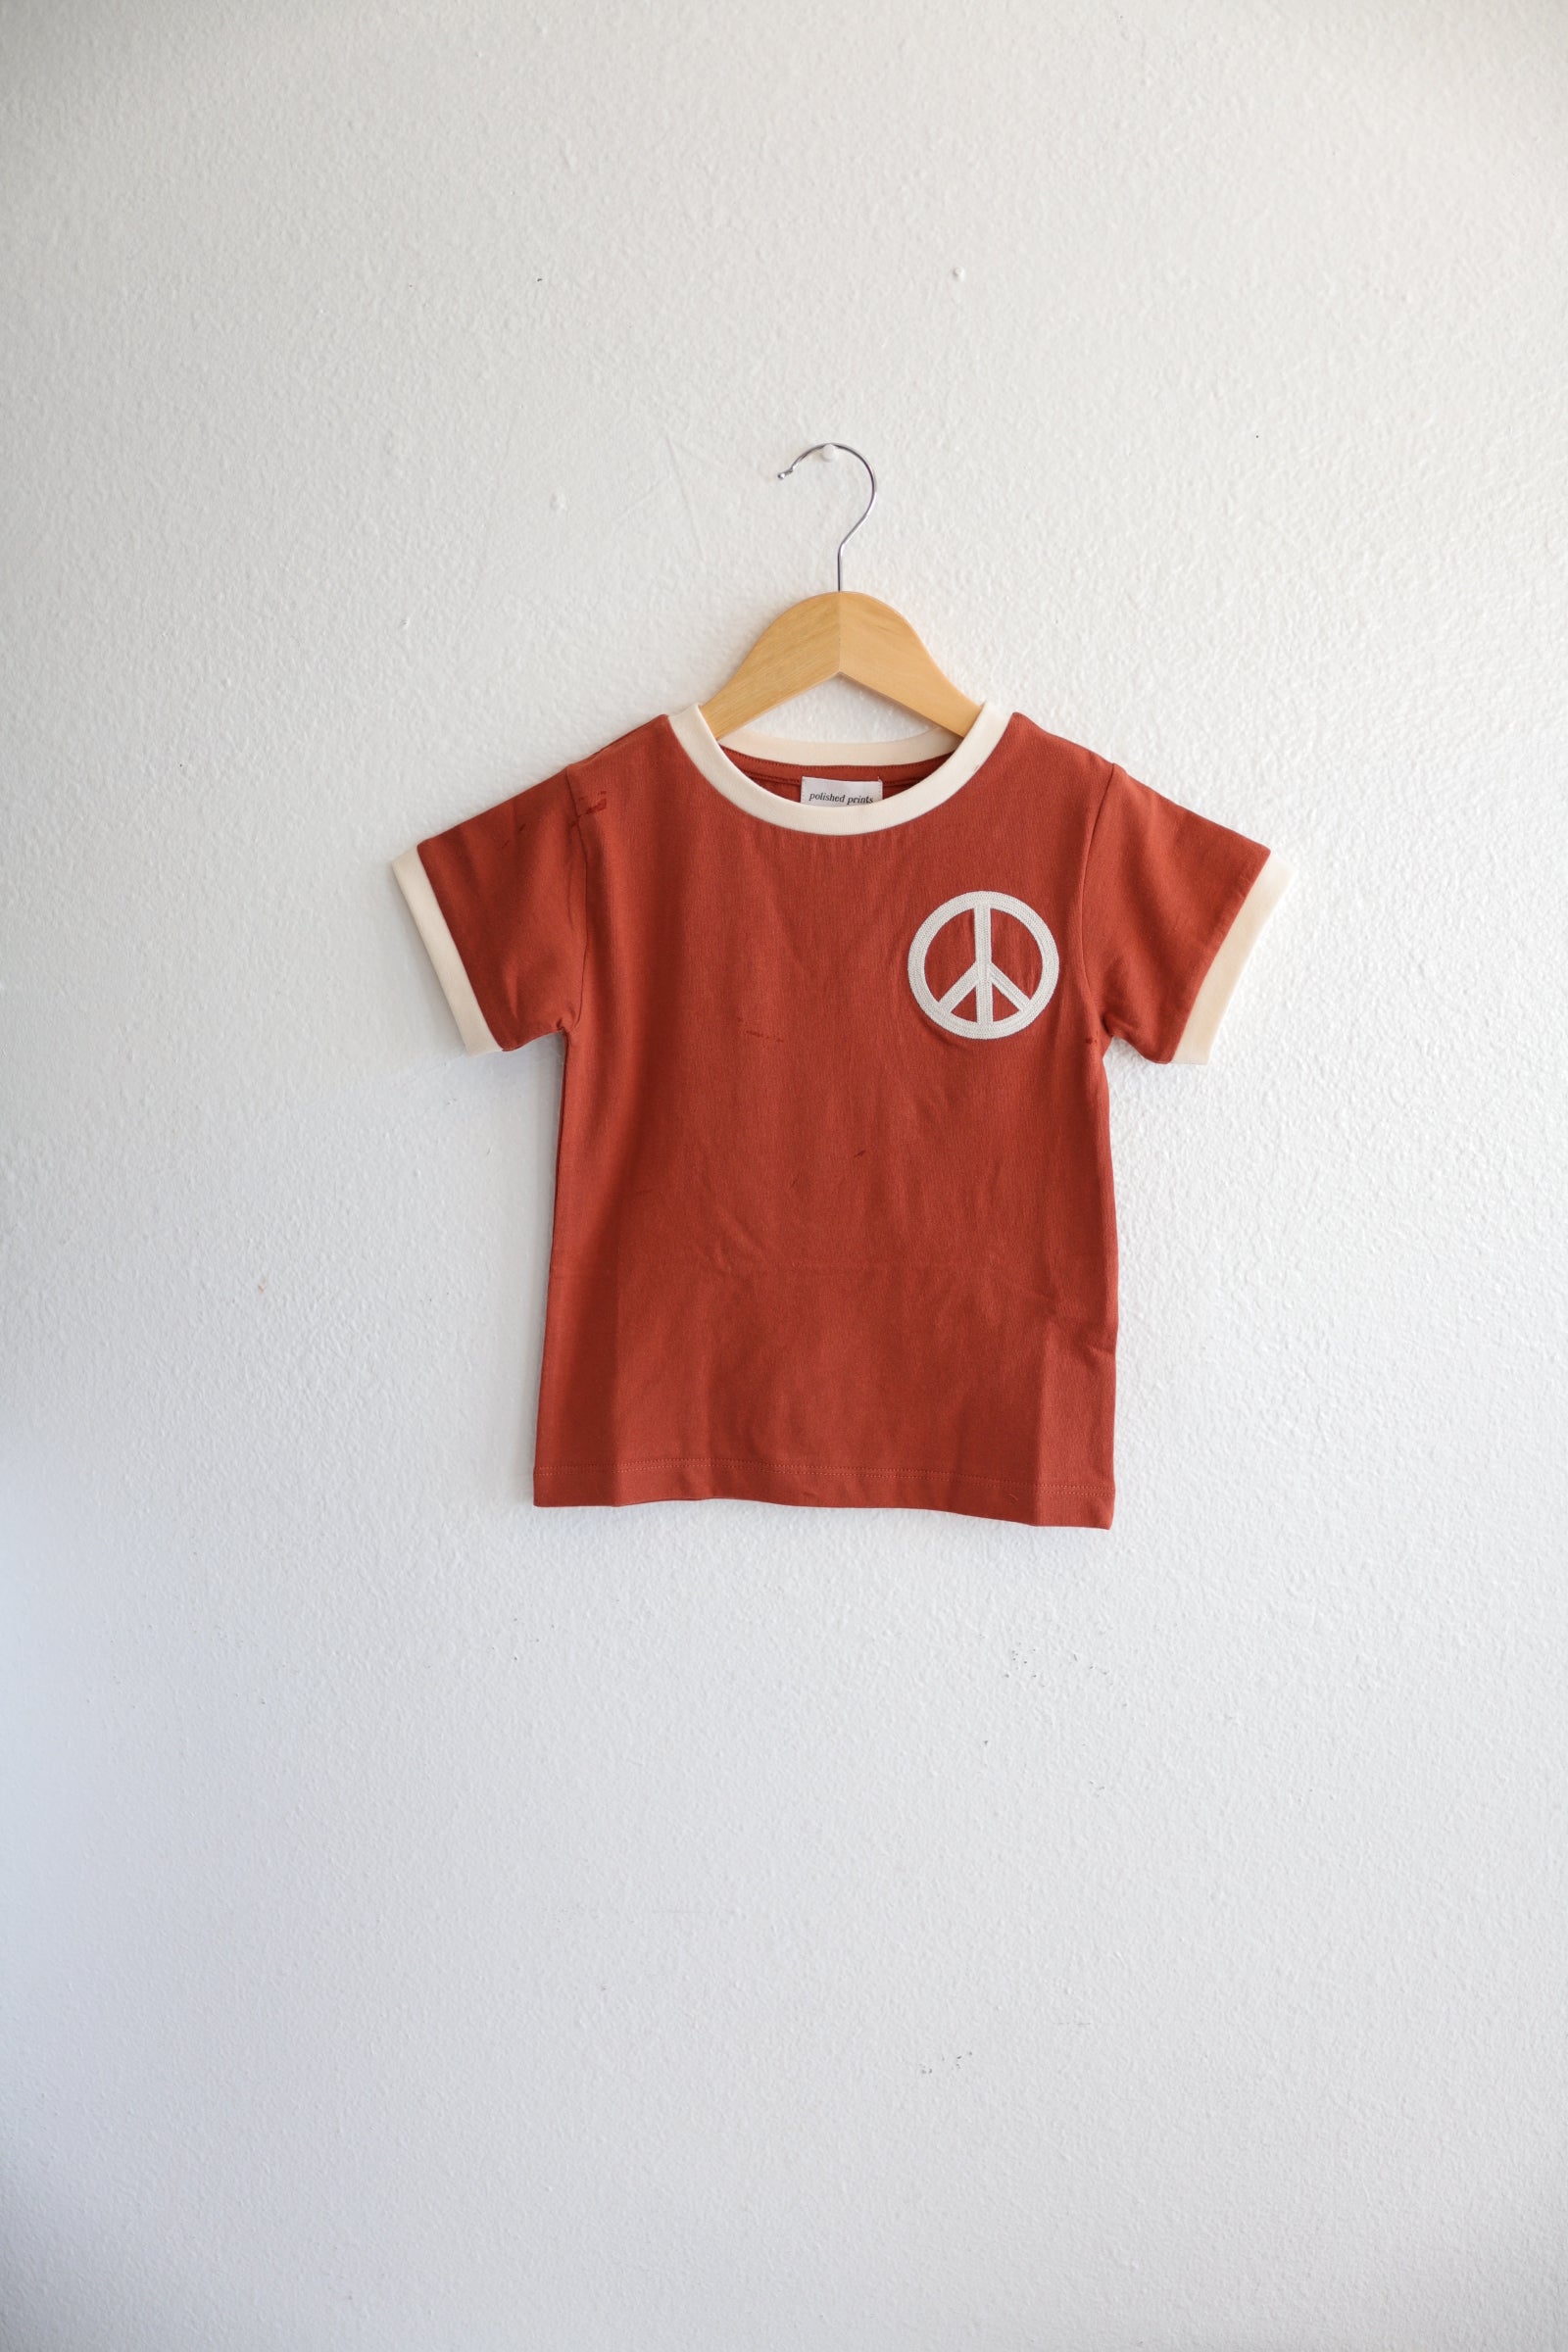 Peace Embroidered Ringer in Auburn